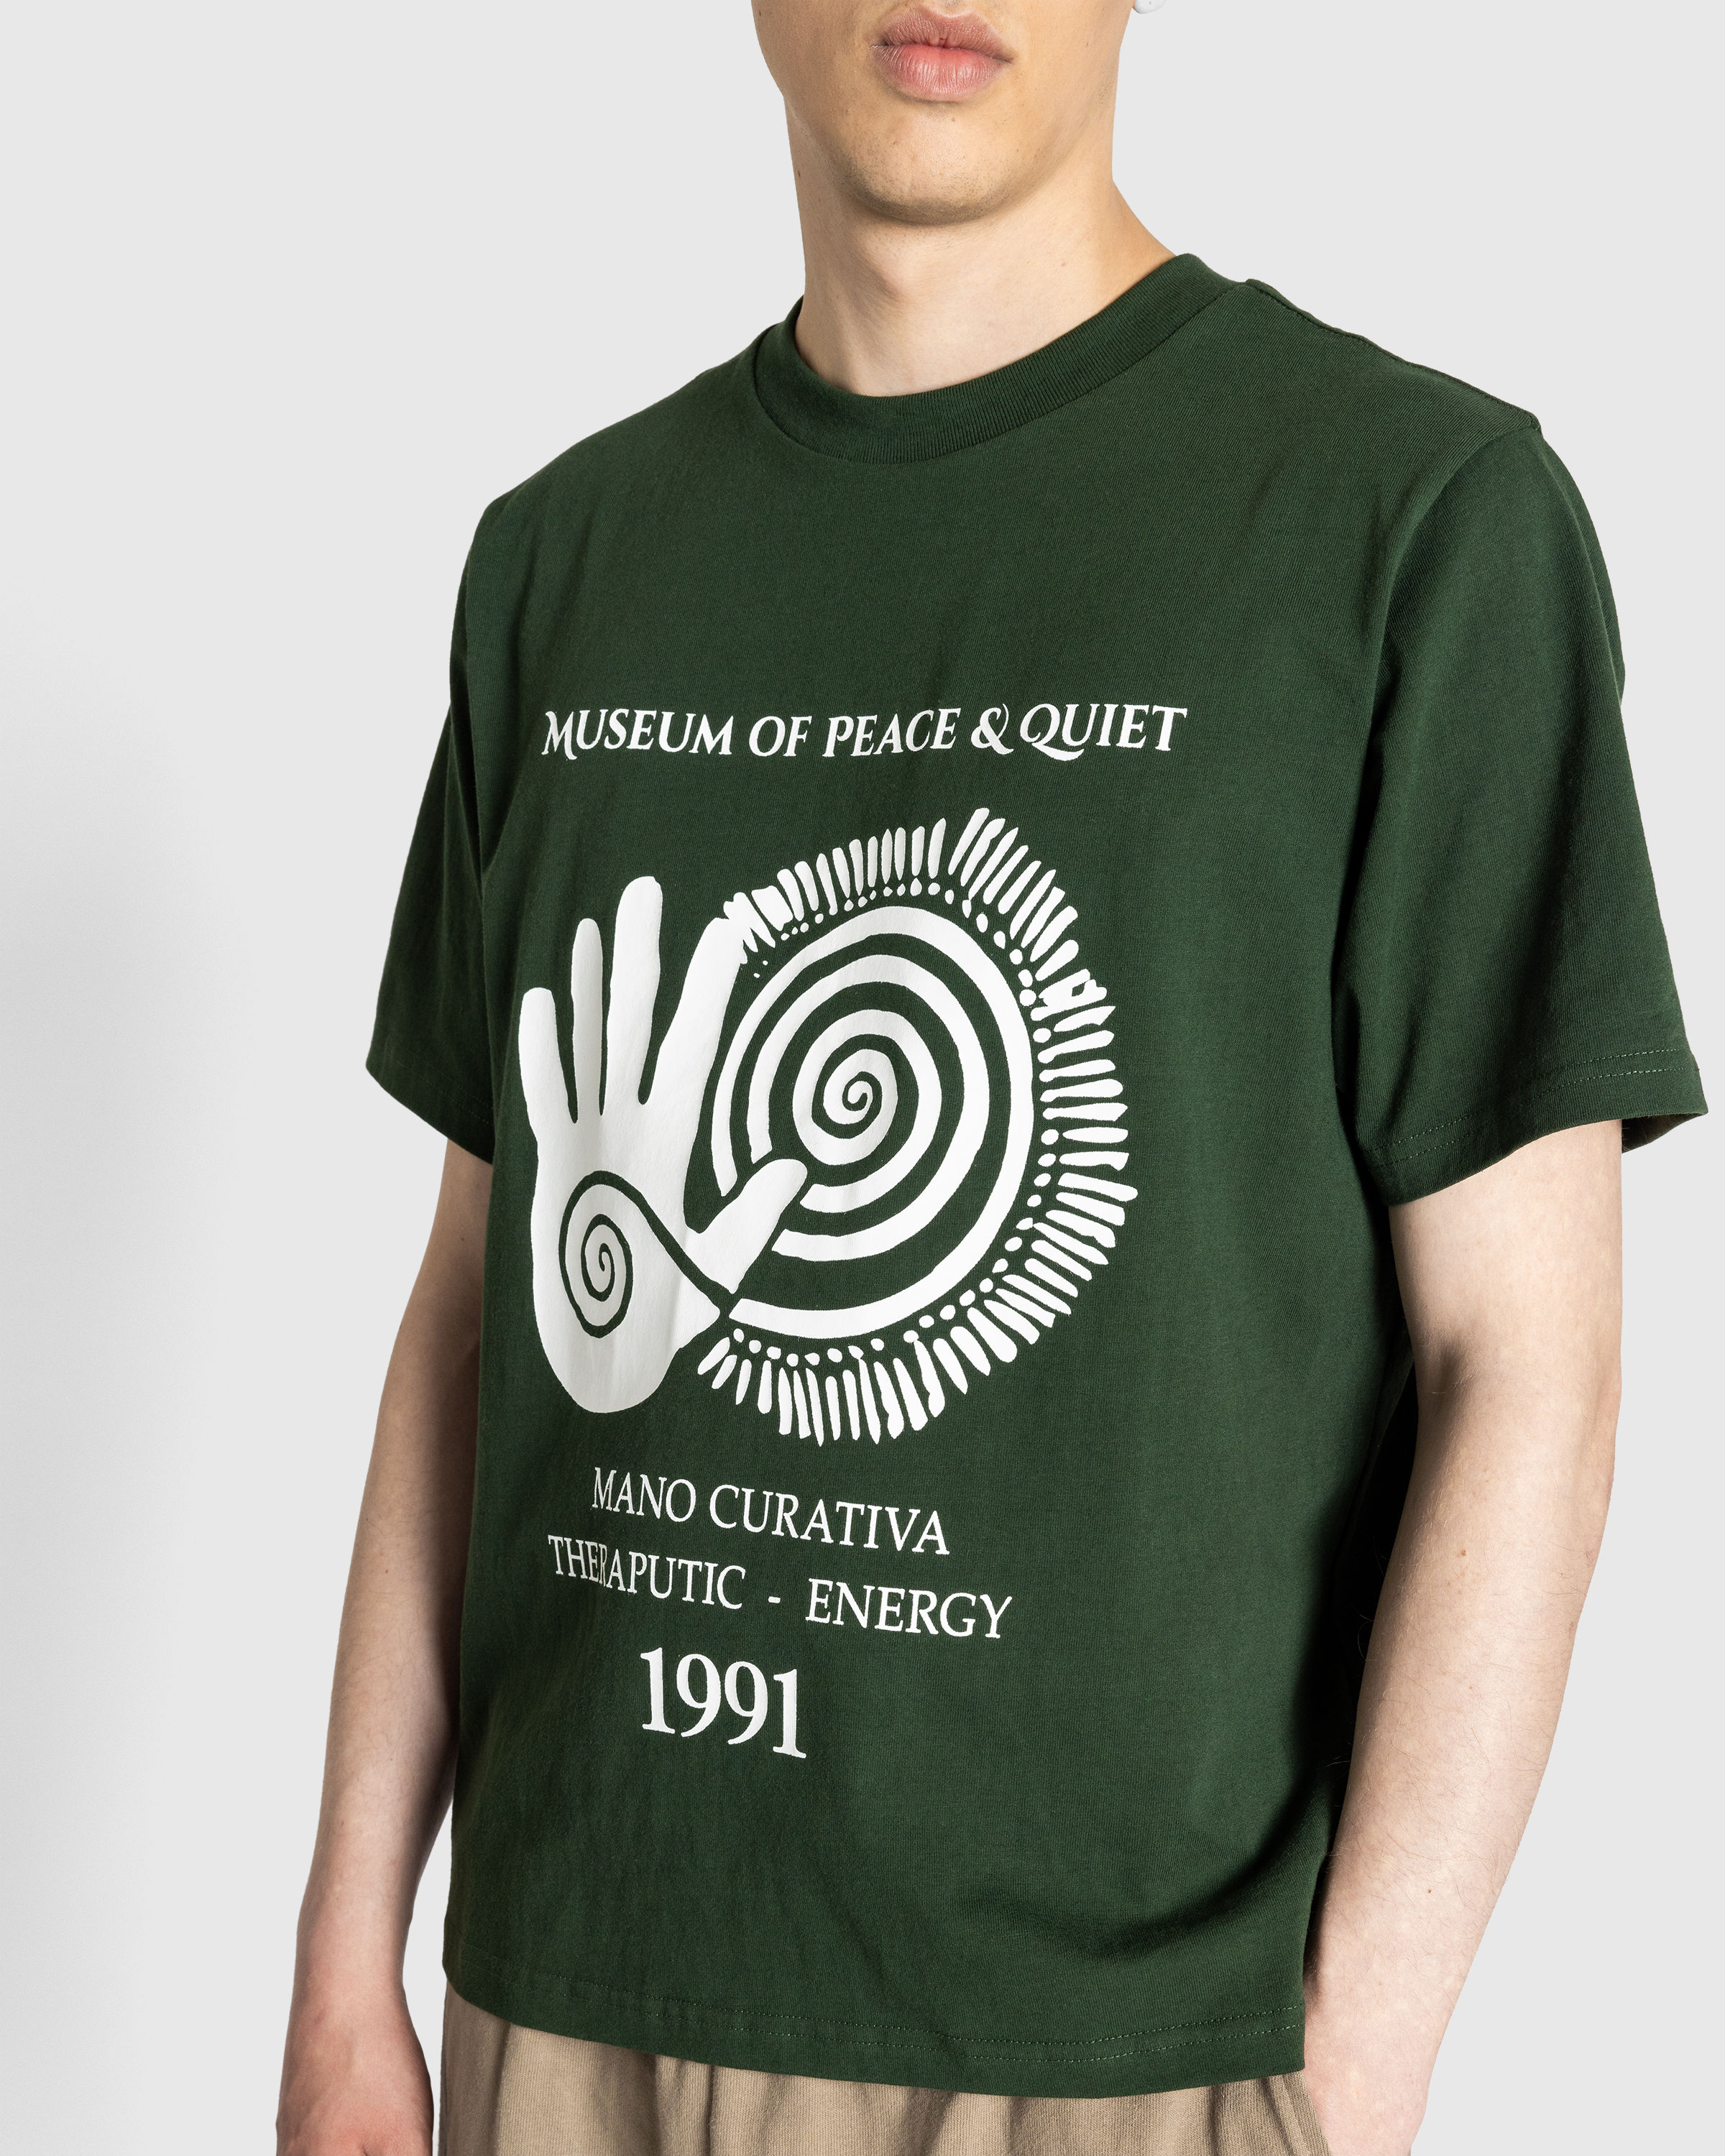 Museum of Peace & Quiet – Mano Curativa T-Shirt Forest - T-Shirts - Green - Image 5